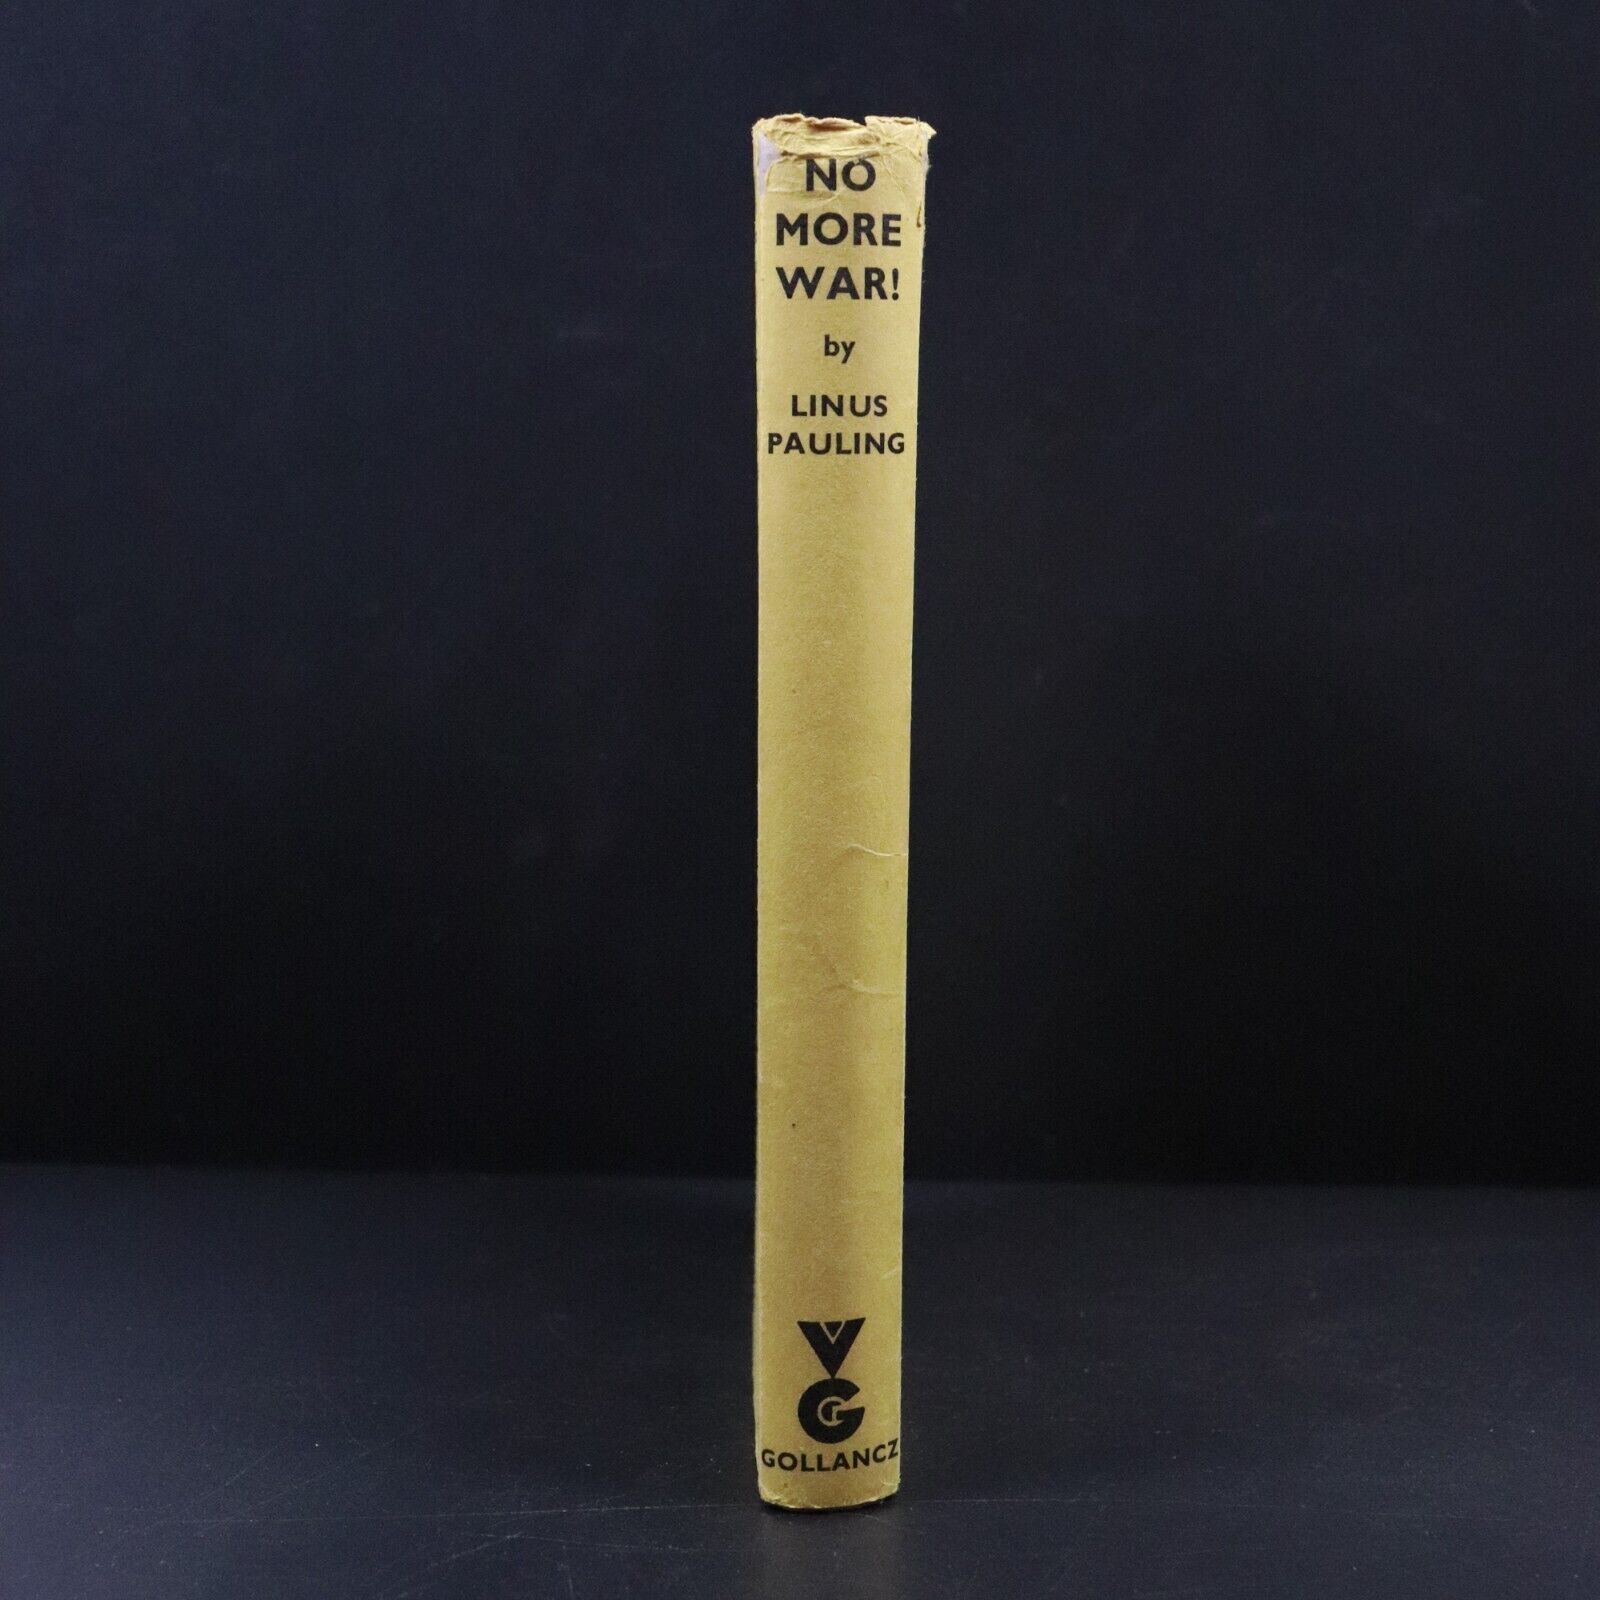 1958 No More War! by Linus Pauling Vintage Political & Anti Nuclear History Book